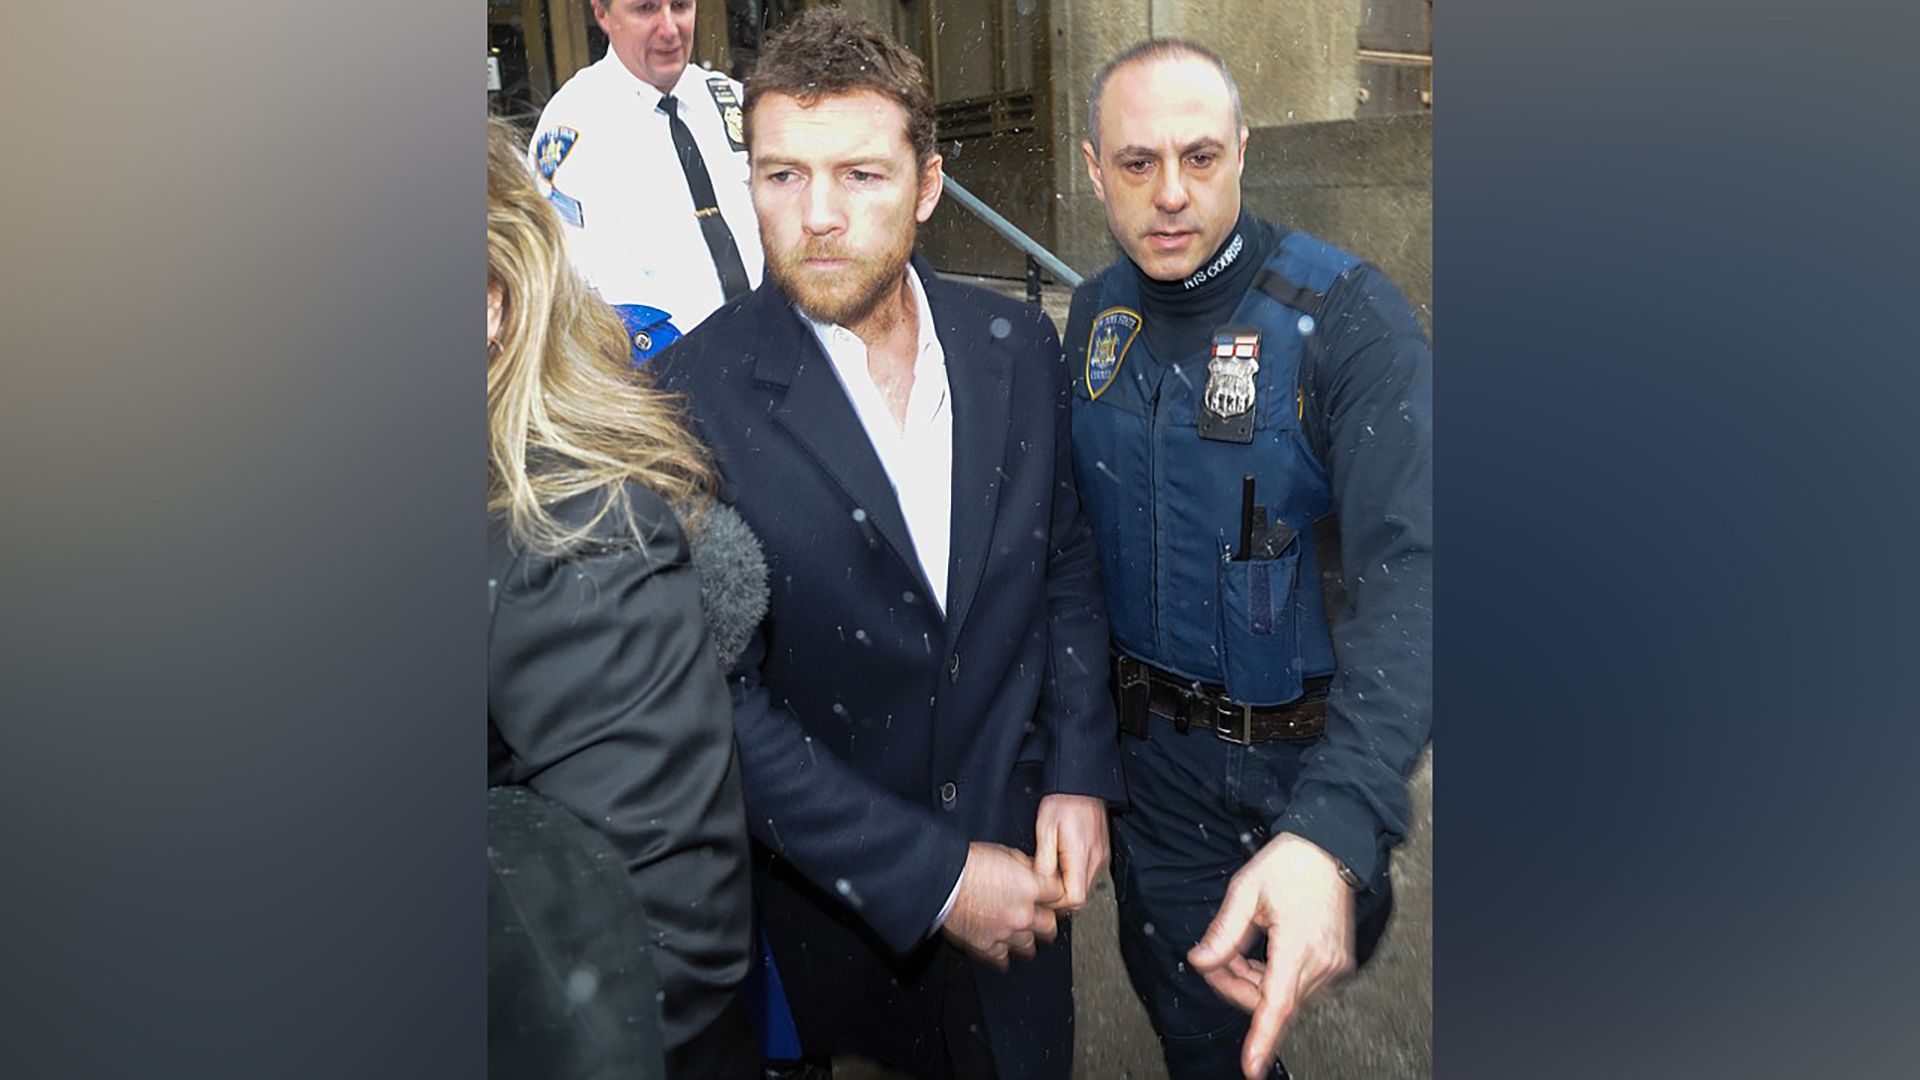 Sam Worthington after the paparazzi trial